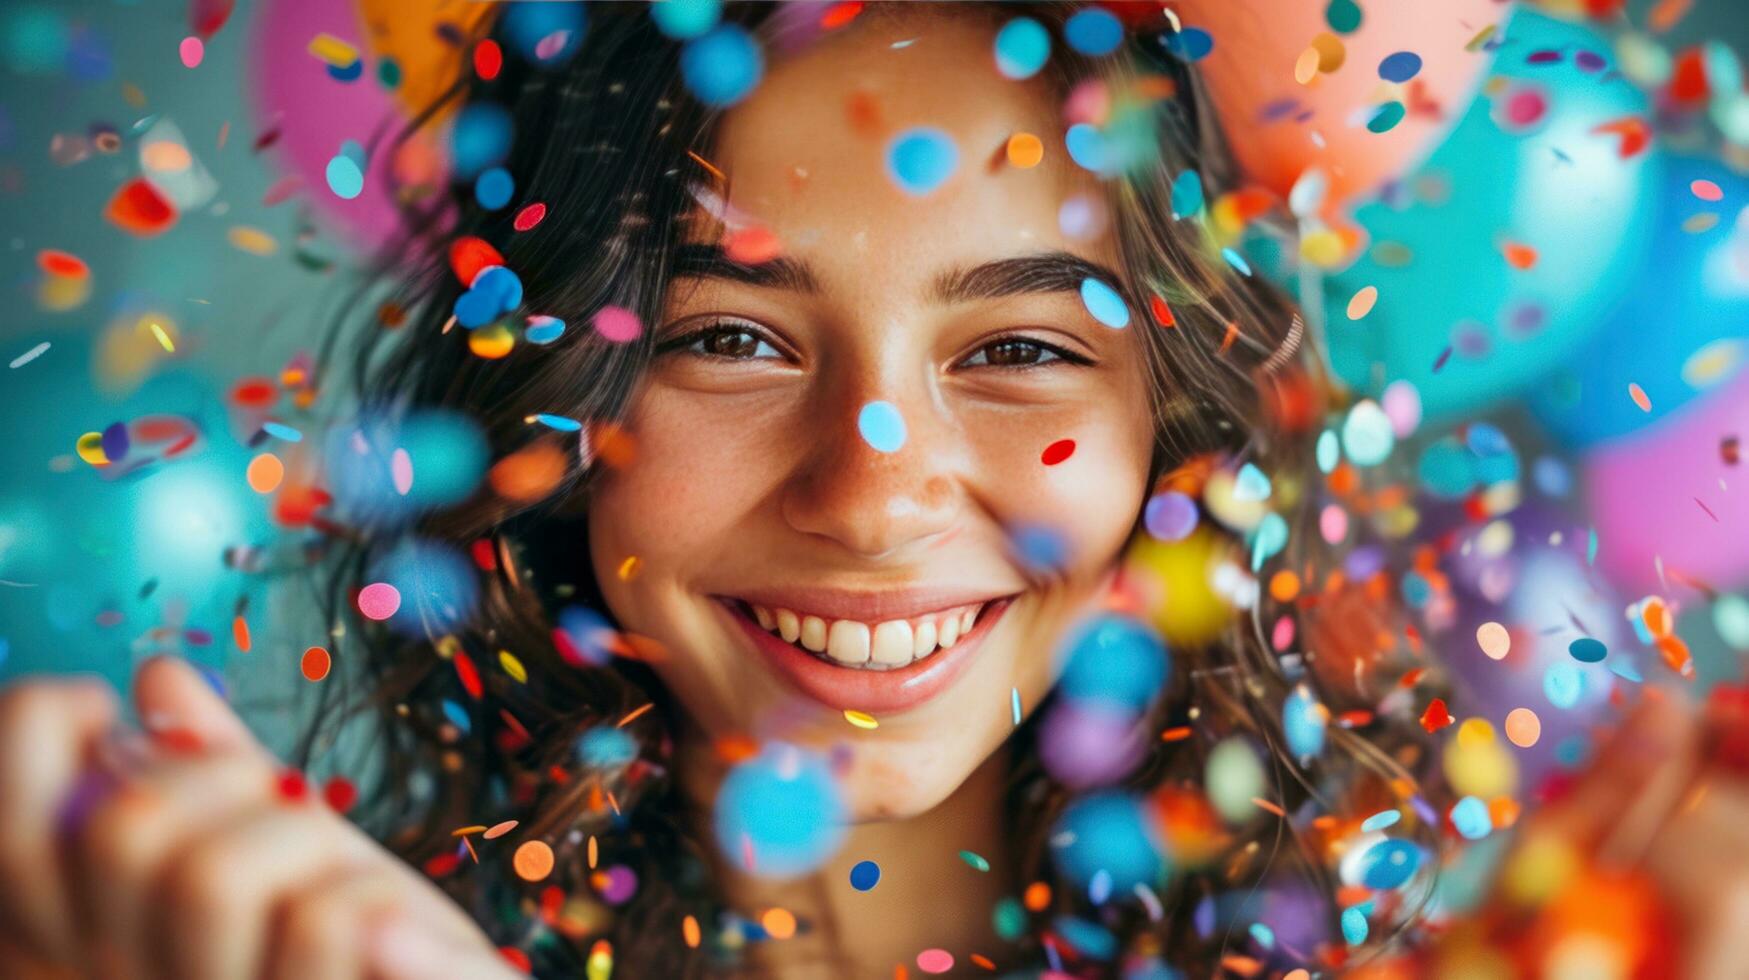 AI generated Smiling faces, confetti showers, and festive decor for a birthday celebration photo